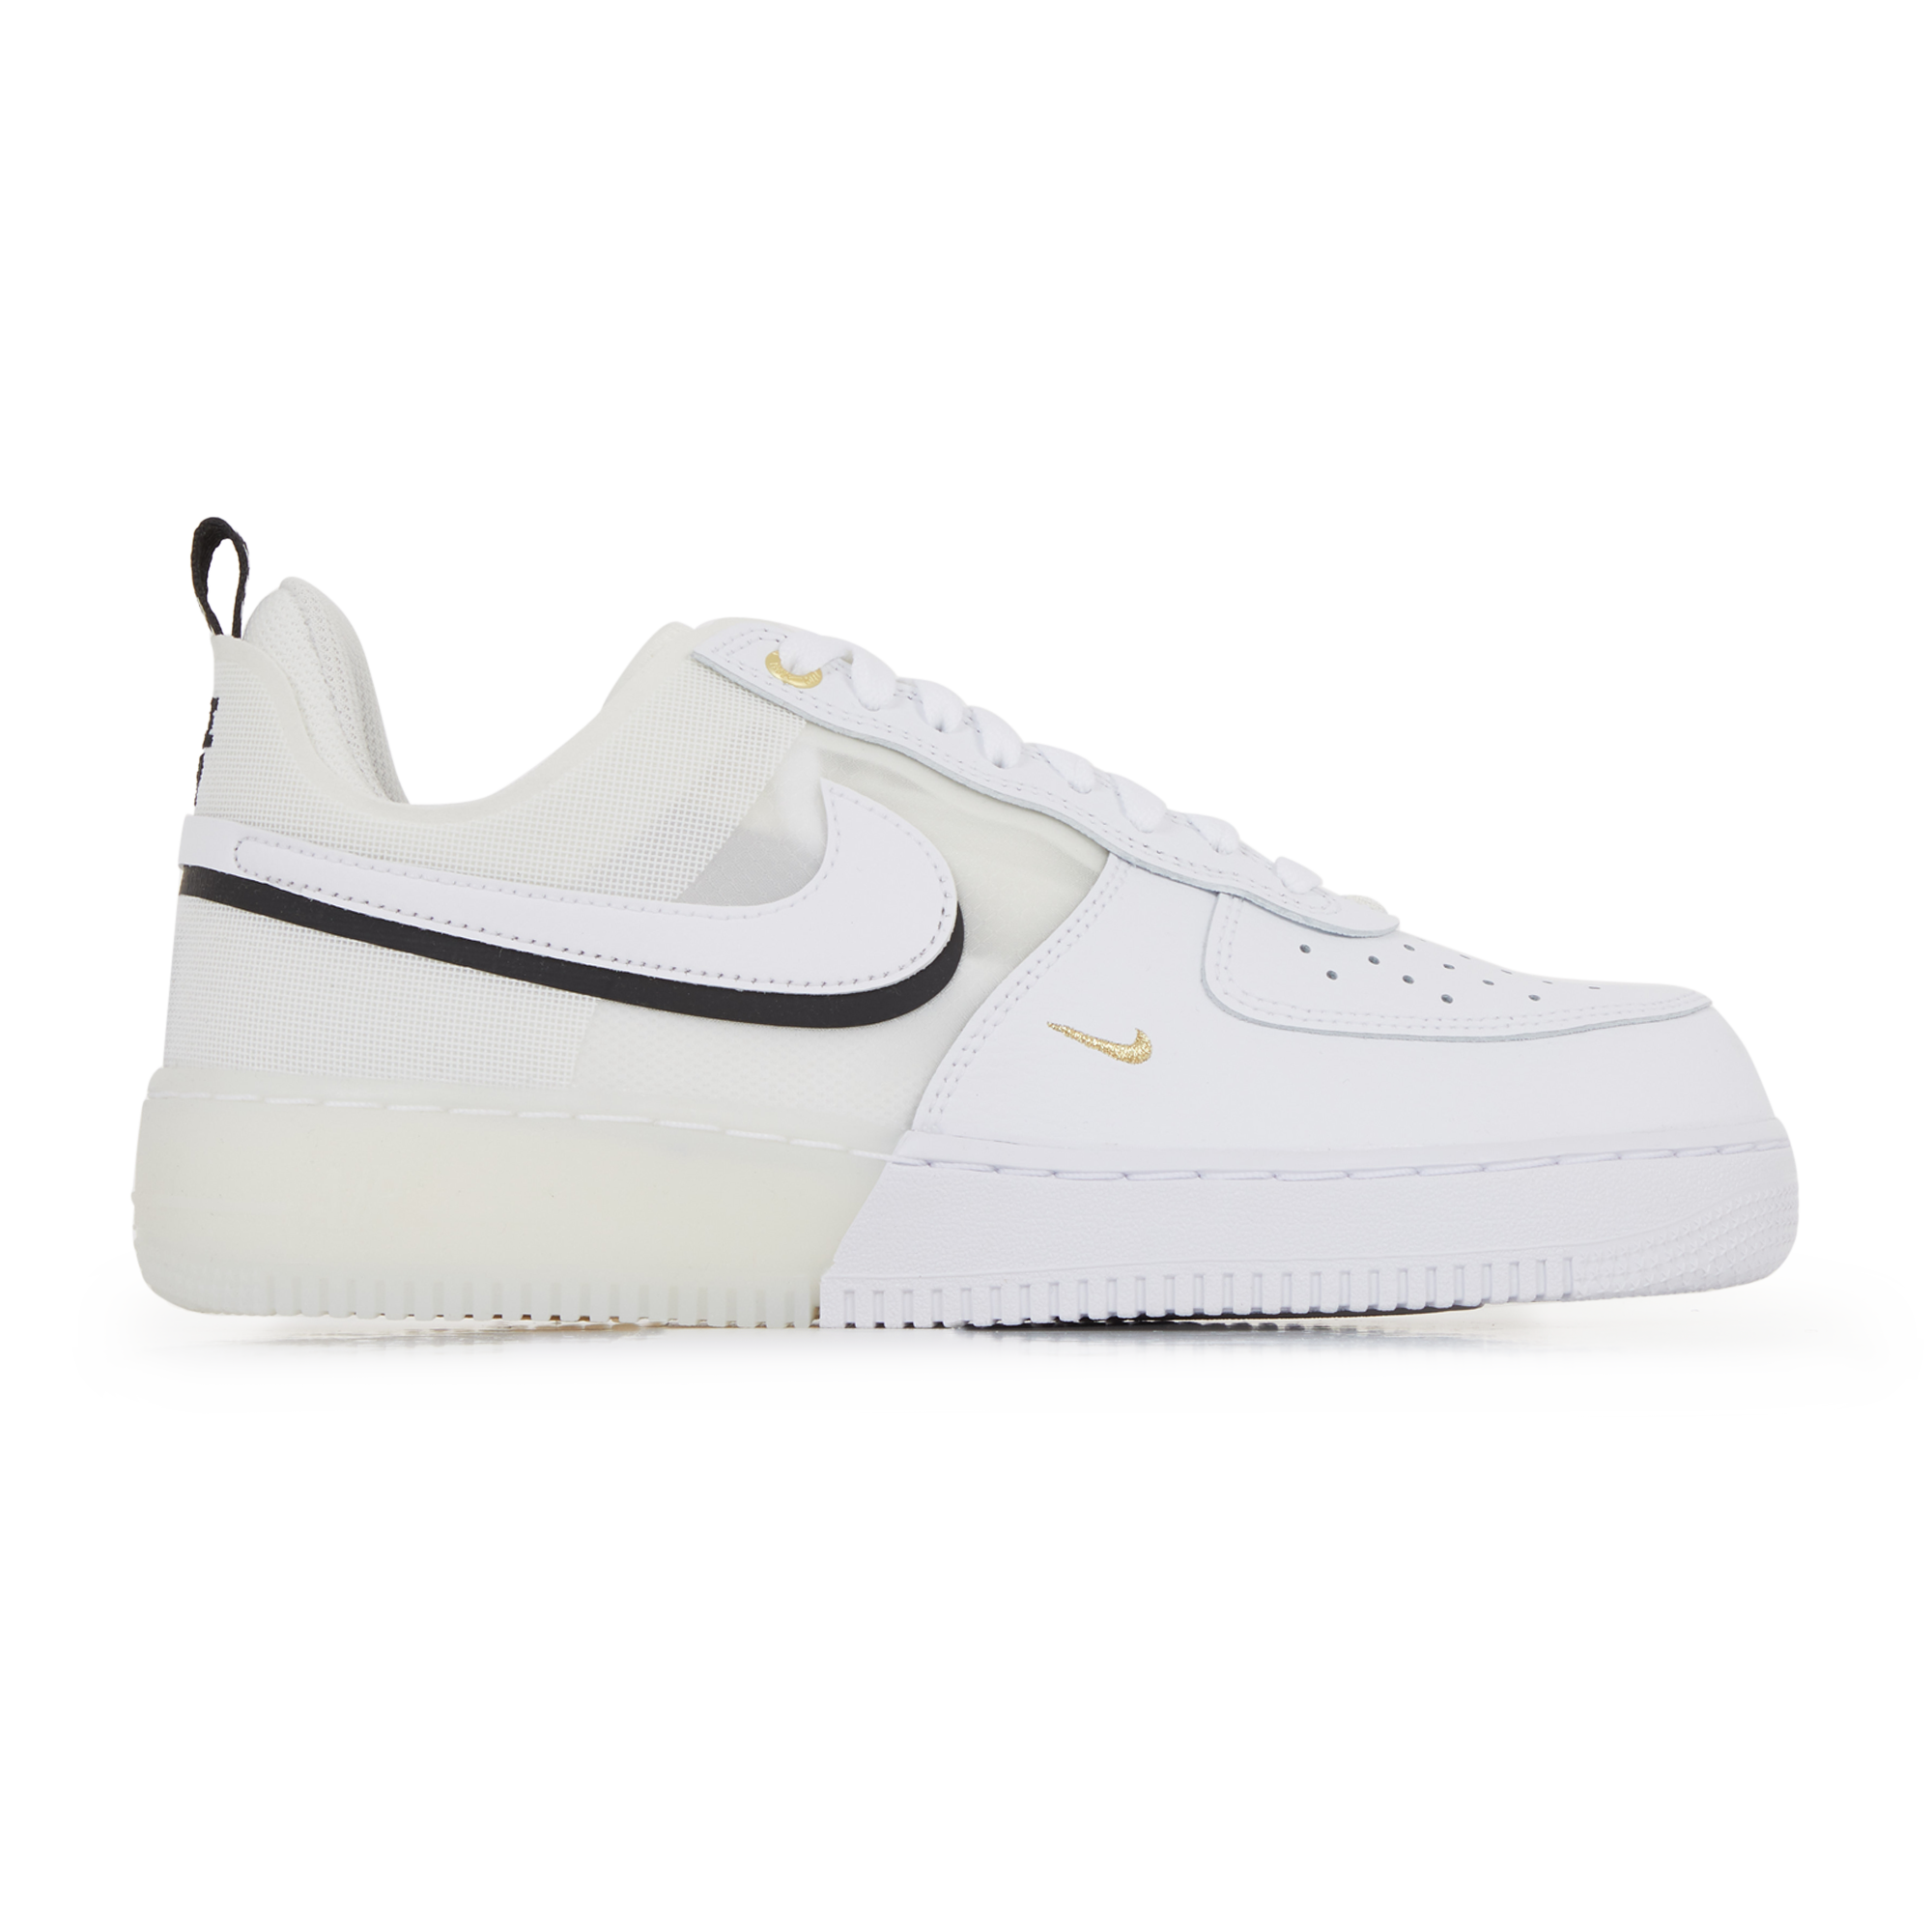 Sangriento Indomable río NIKE AIR FORCE 1 LOW REACT 1.5 40TH BLANCO/NEGRO | Courir.es